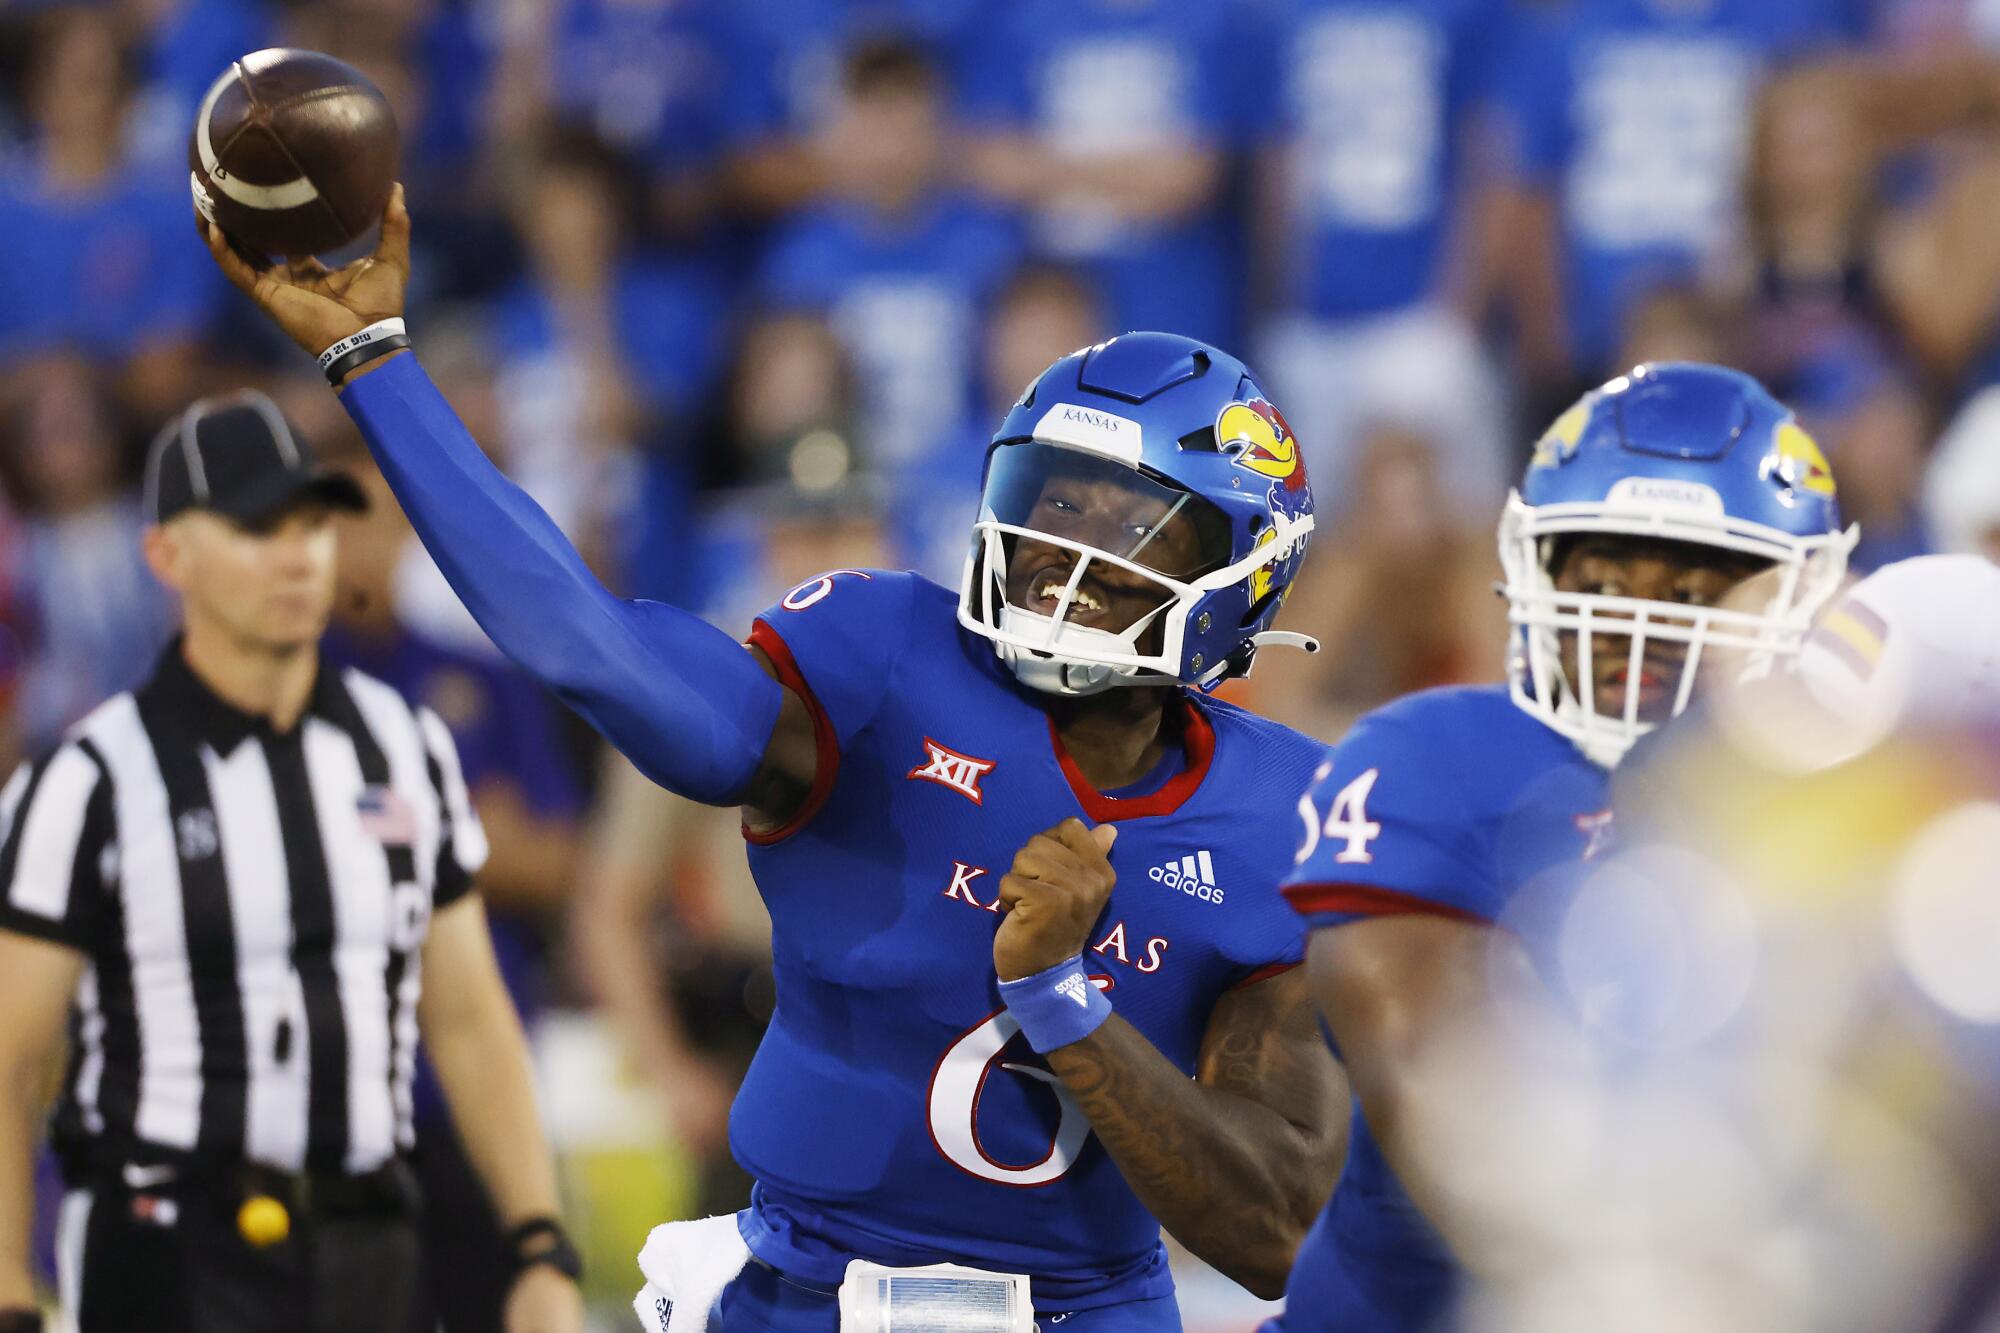 Kansas quarterback Jalon Daniels passes a football in front of a referee and teammate during a game.